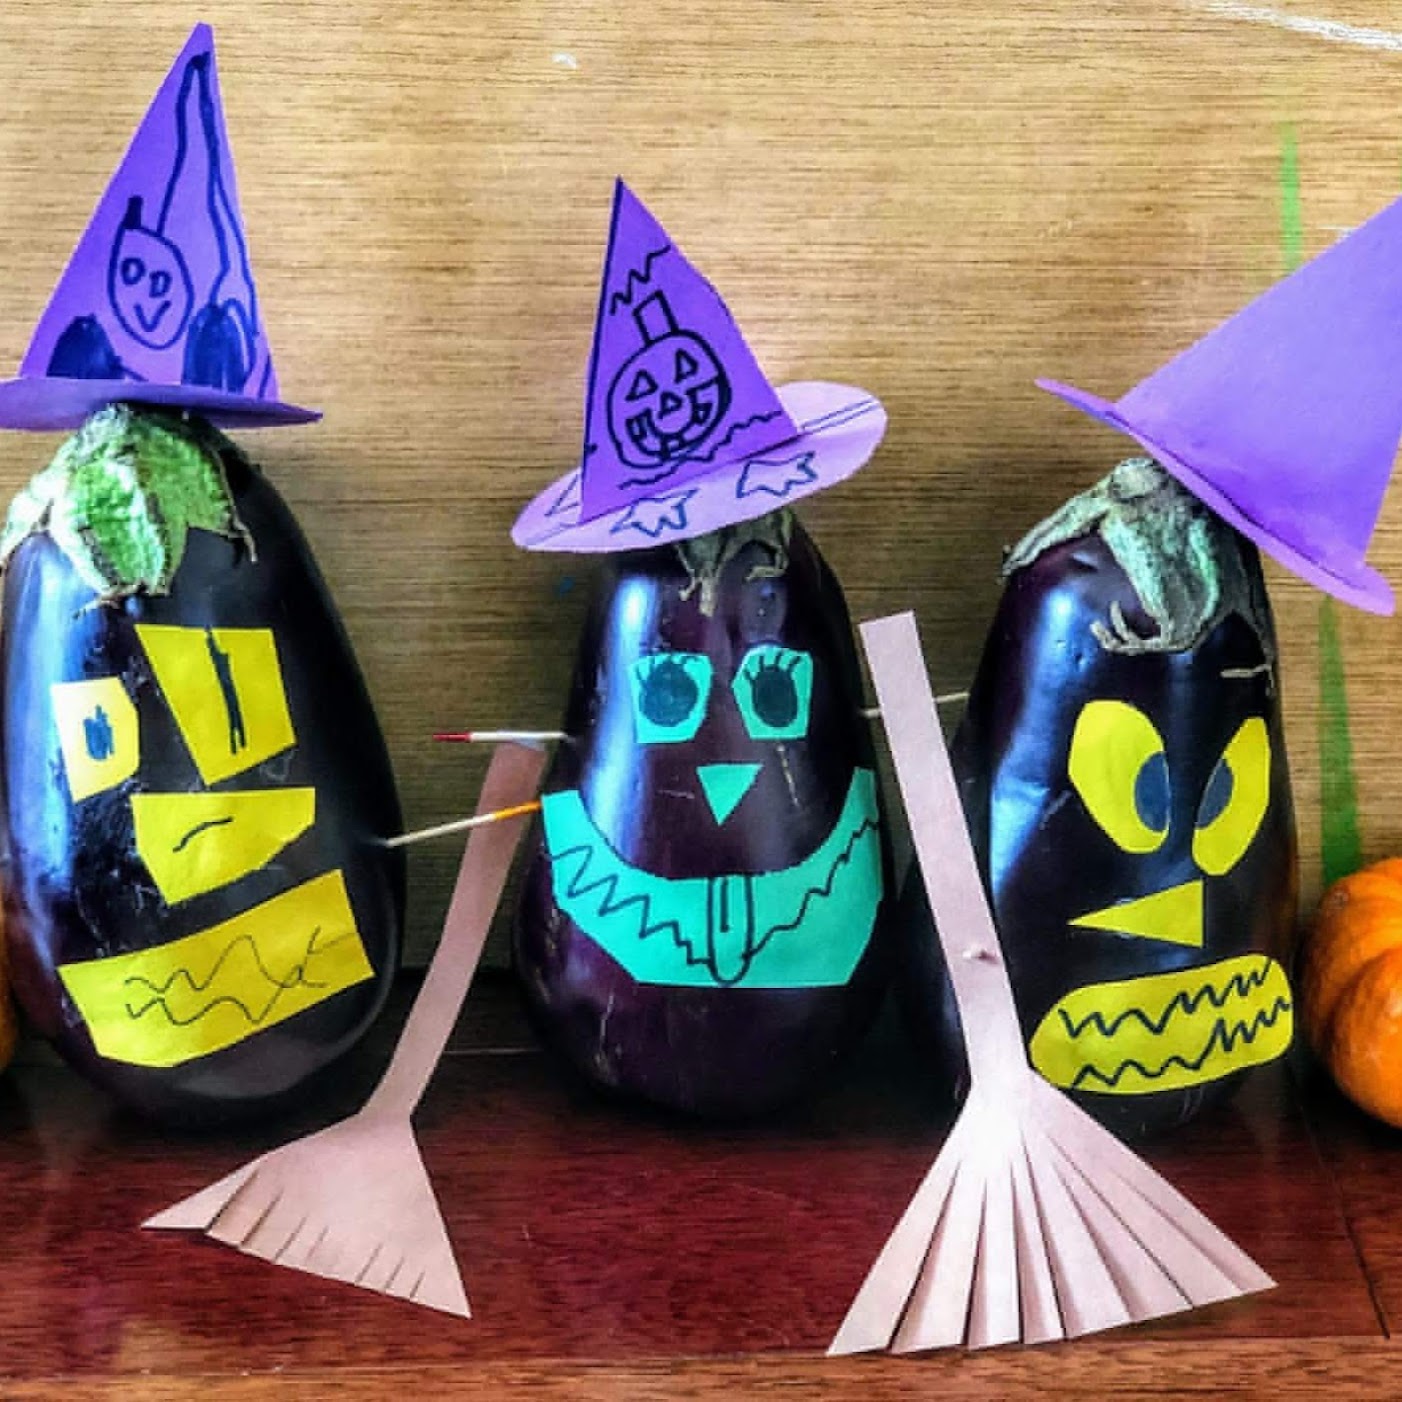 three eggplants decorated as witches with paper: purple hats, bronw booms, and green/yellow spooky faces